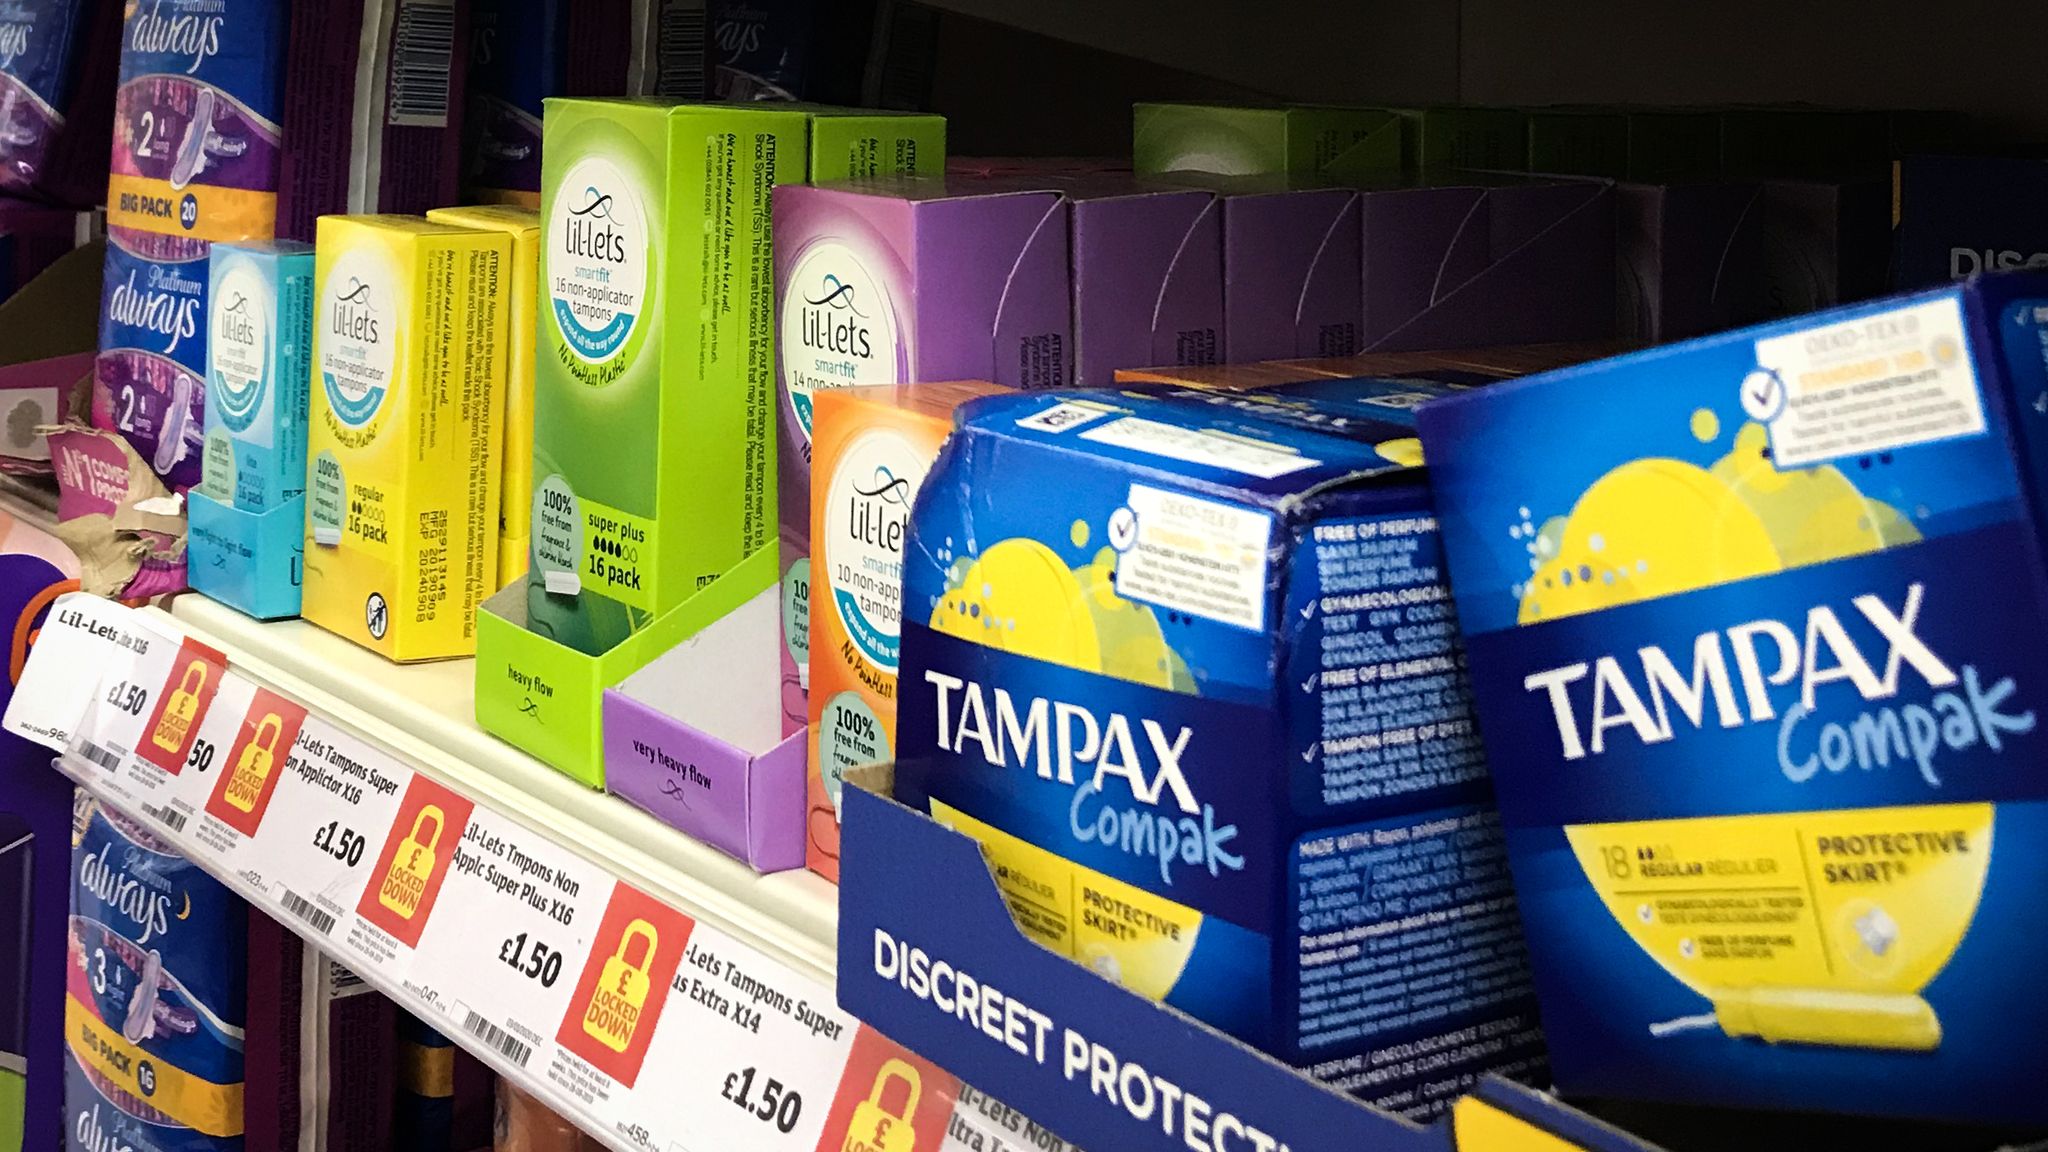 Scotland to country in world to provide free period products | Politics News | Sky News